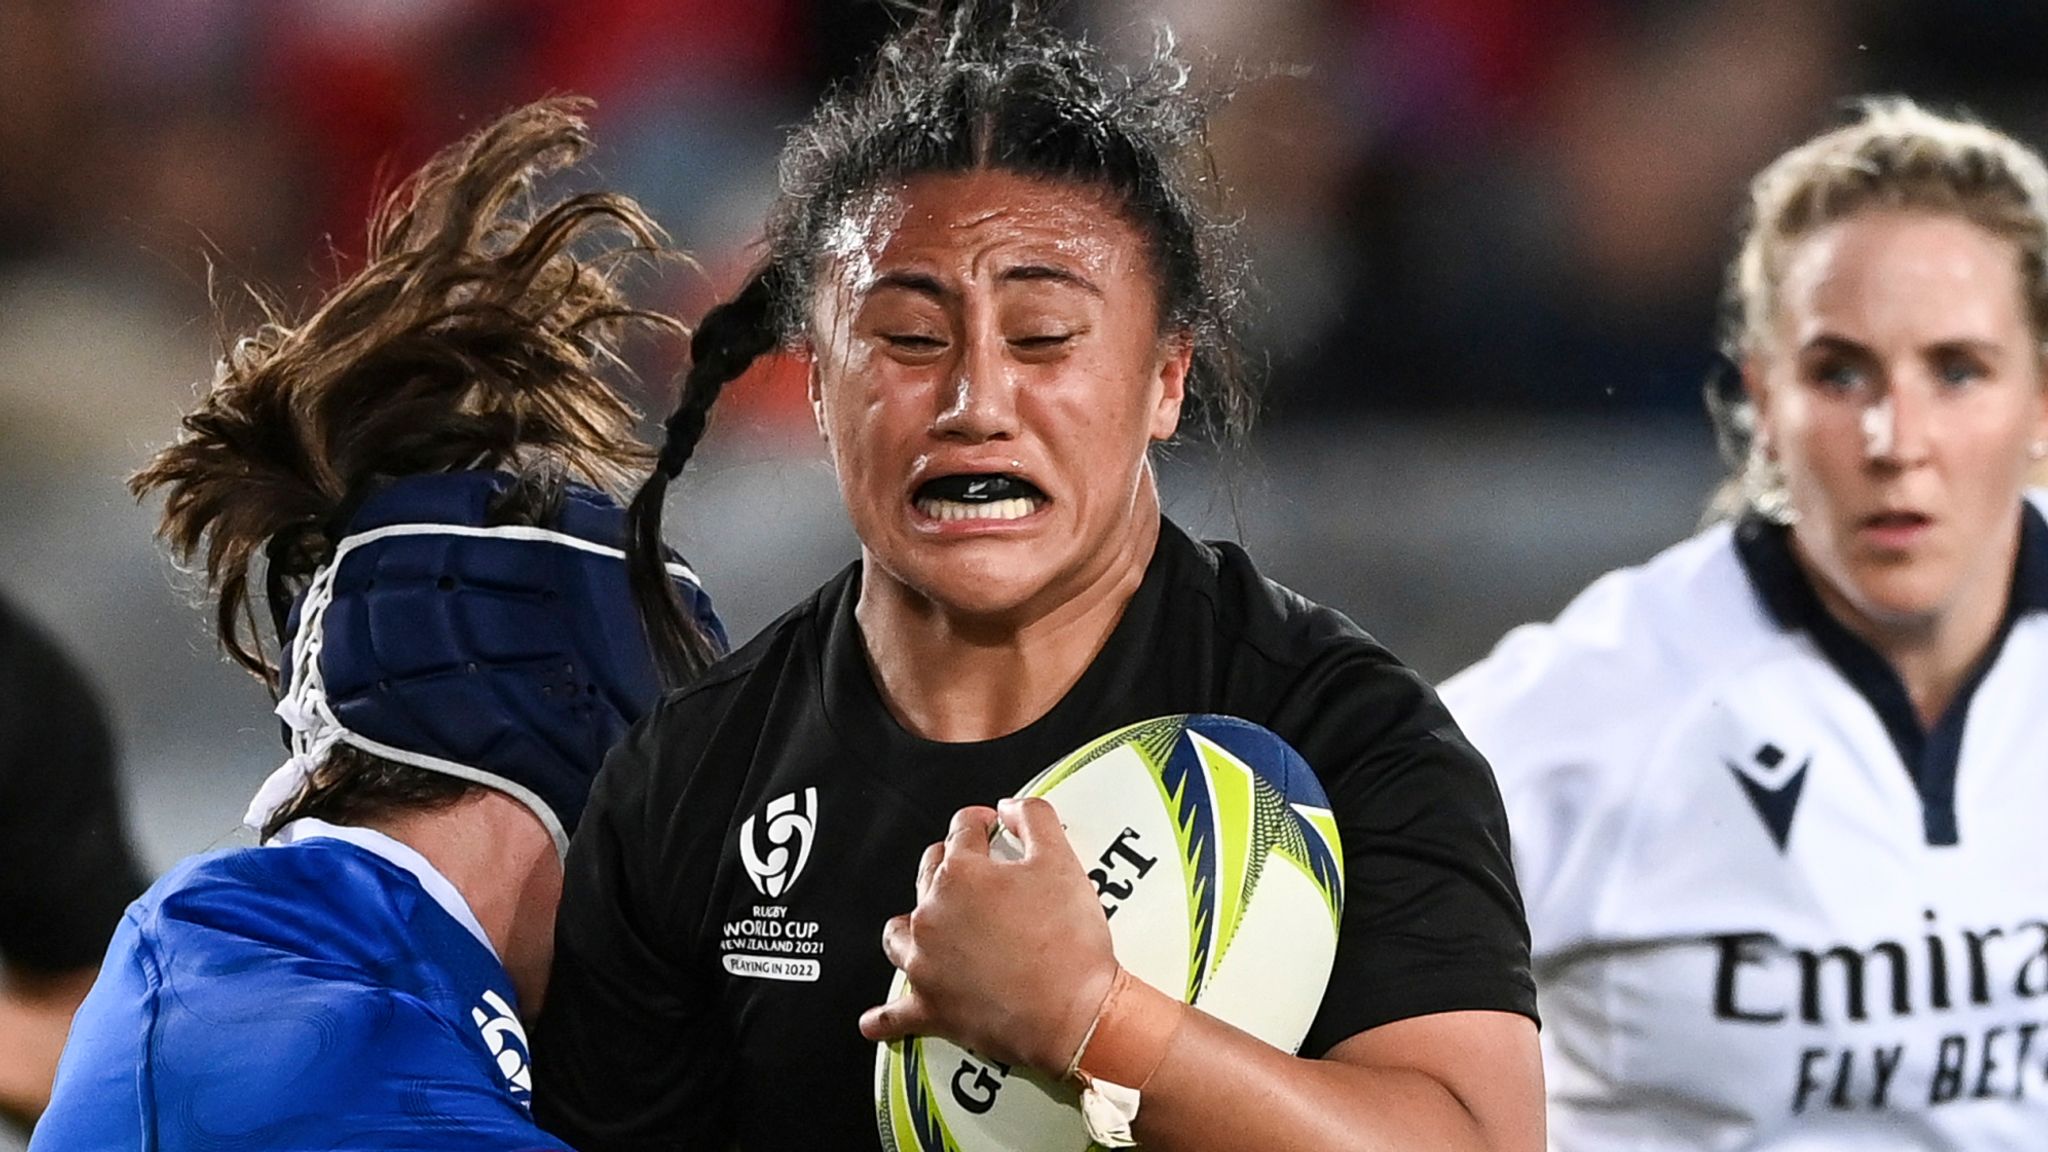 Rugby World Cup France last-gasp penalty miss sees New Zealand book repeat final spot against England Rugby Union News Sky Sports